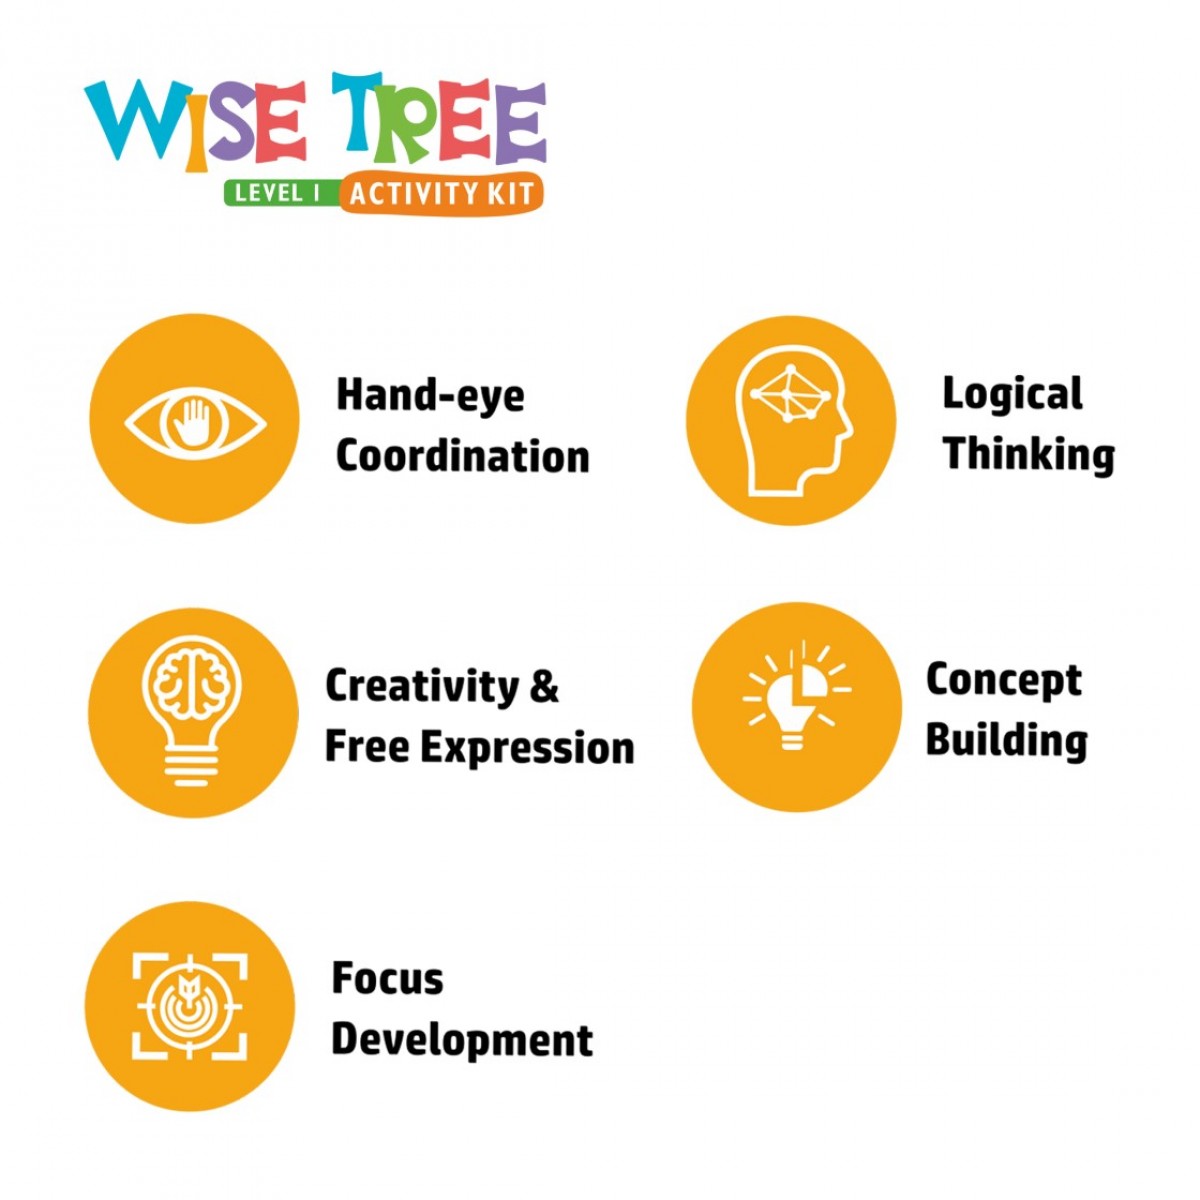 Flo Wise Tree Level 1 learning kit for kids Multicolour 5Y+